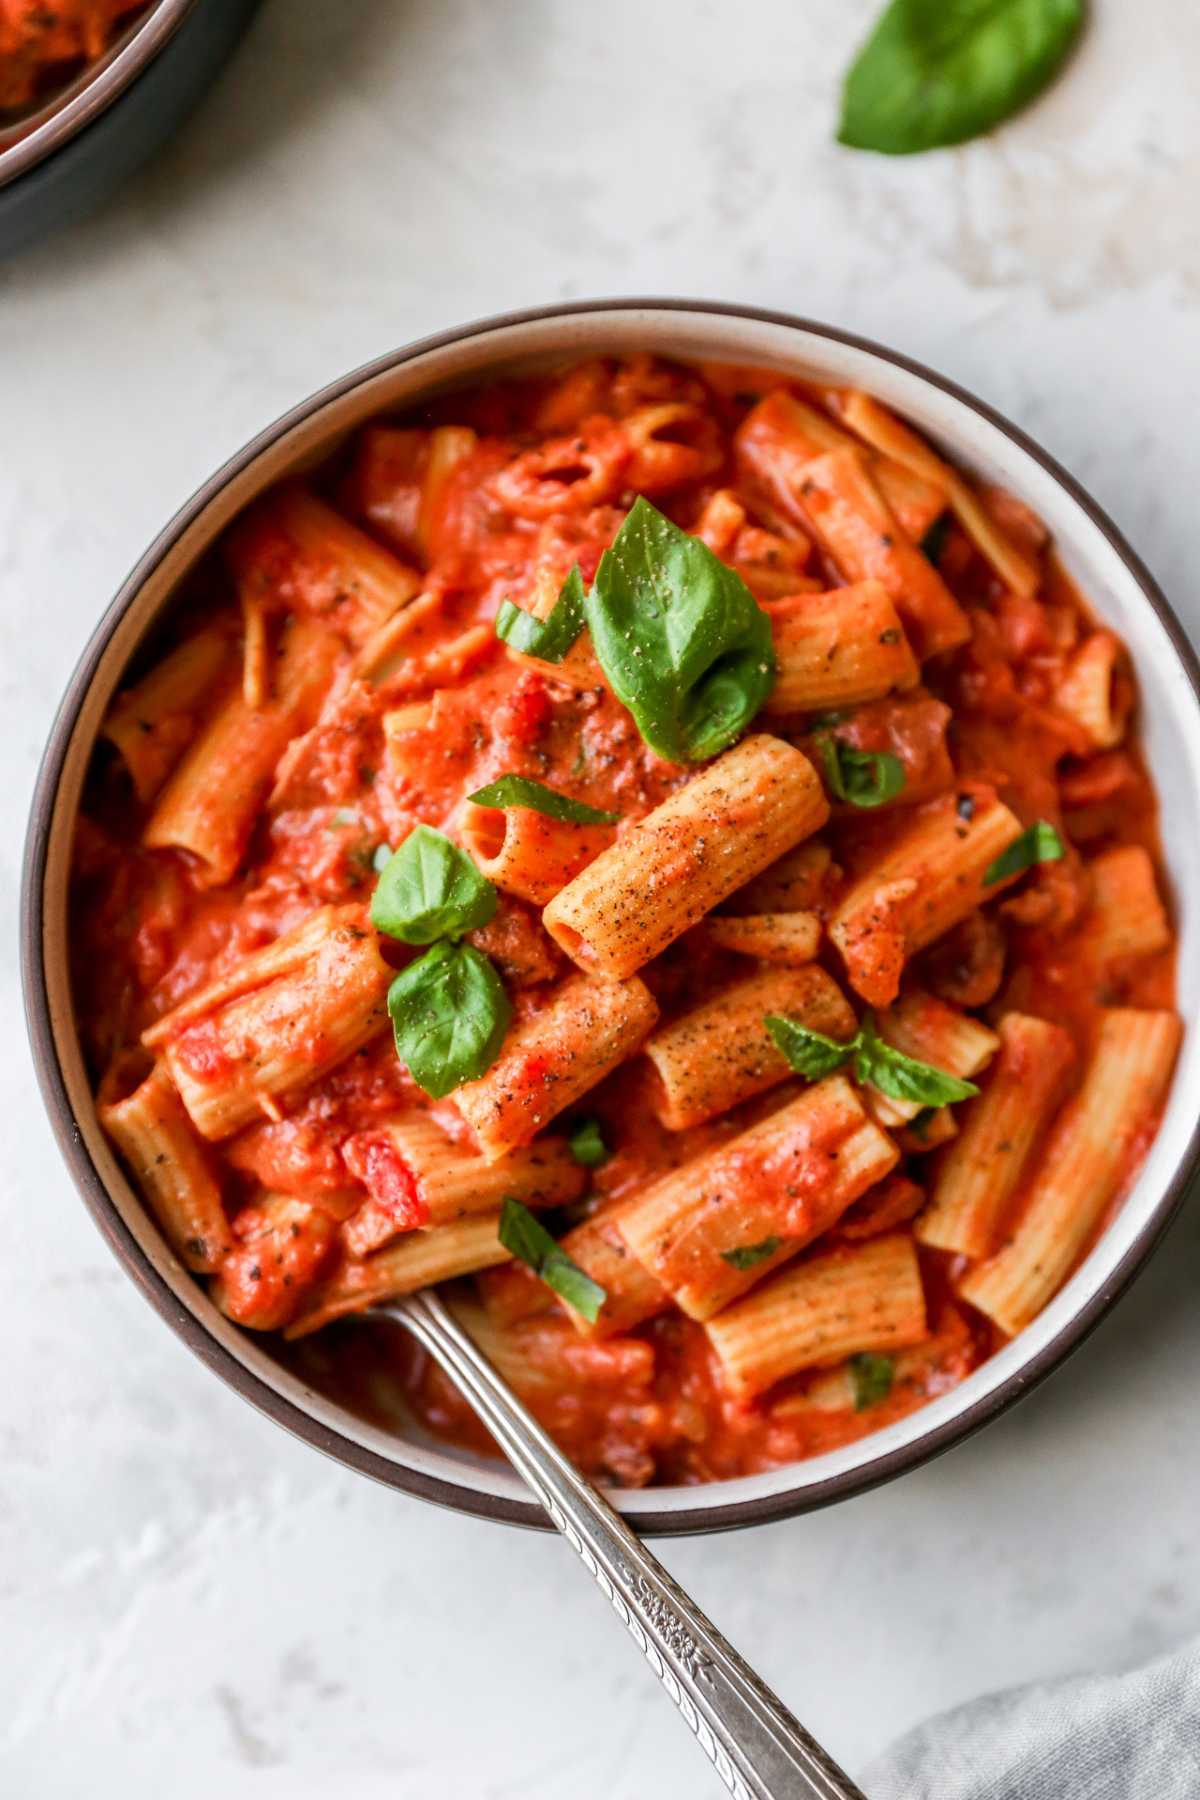 Bowl filled with rigatoni and covered with a creamy tomato pasta sauce.